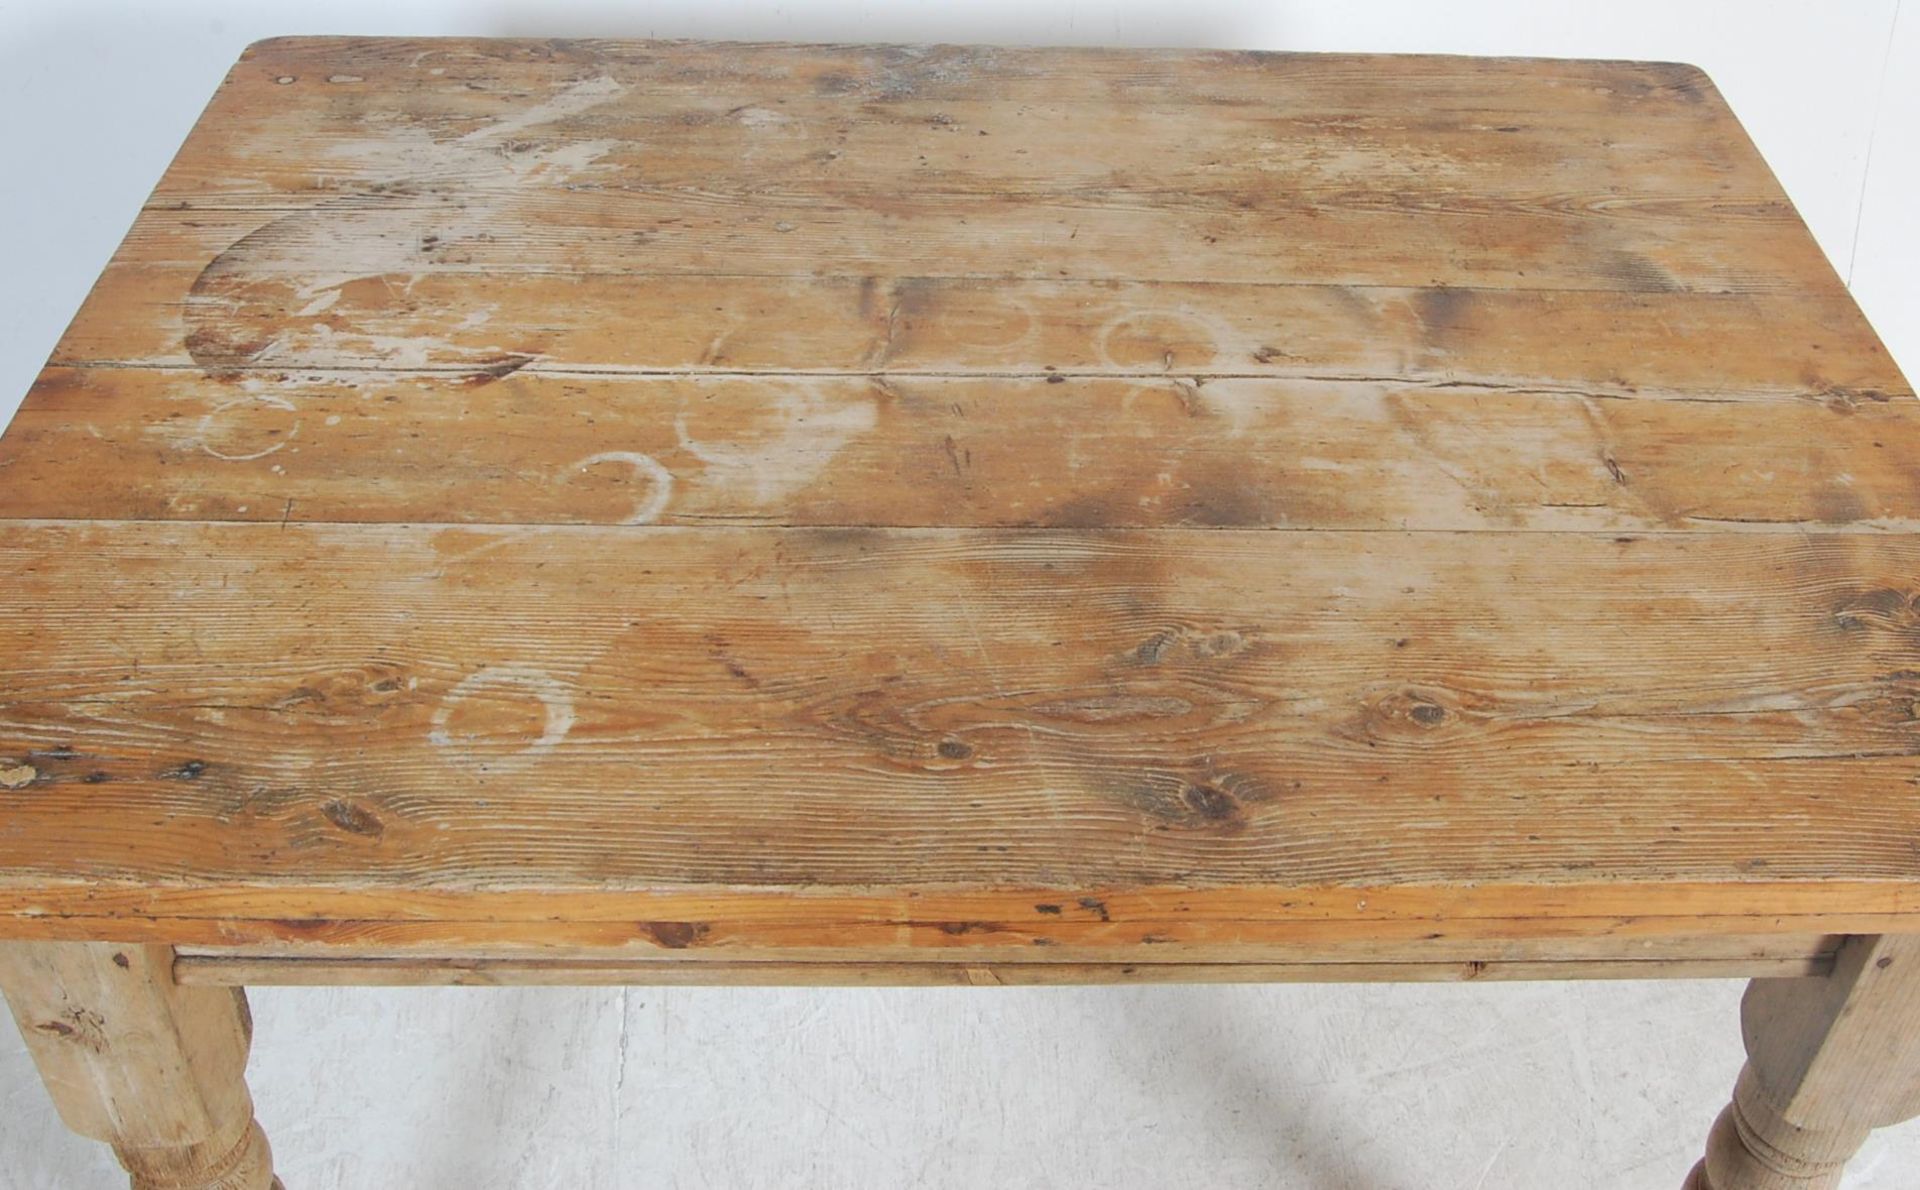 VICTORIAN 19TH CENTURY COUNTRY PINE DINING TABLE - Image 3 of 5